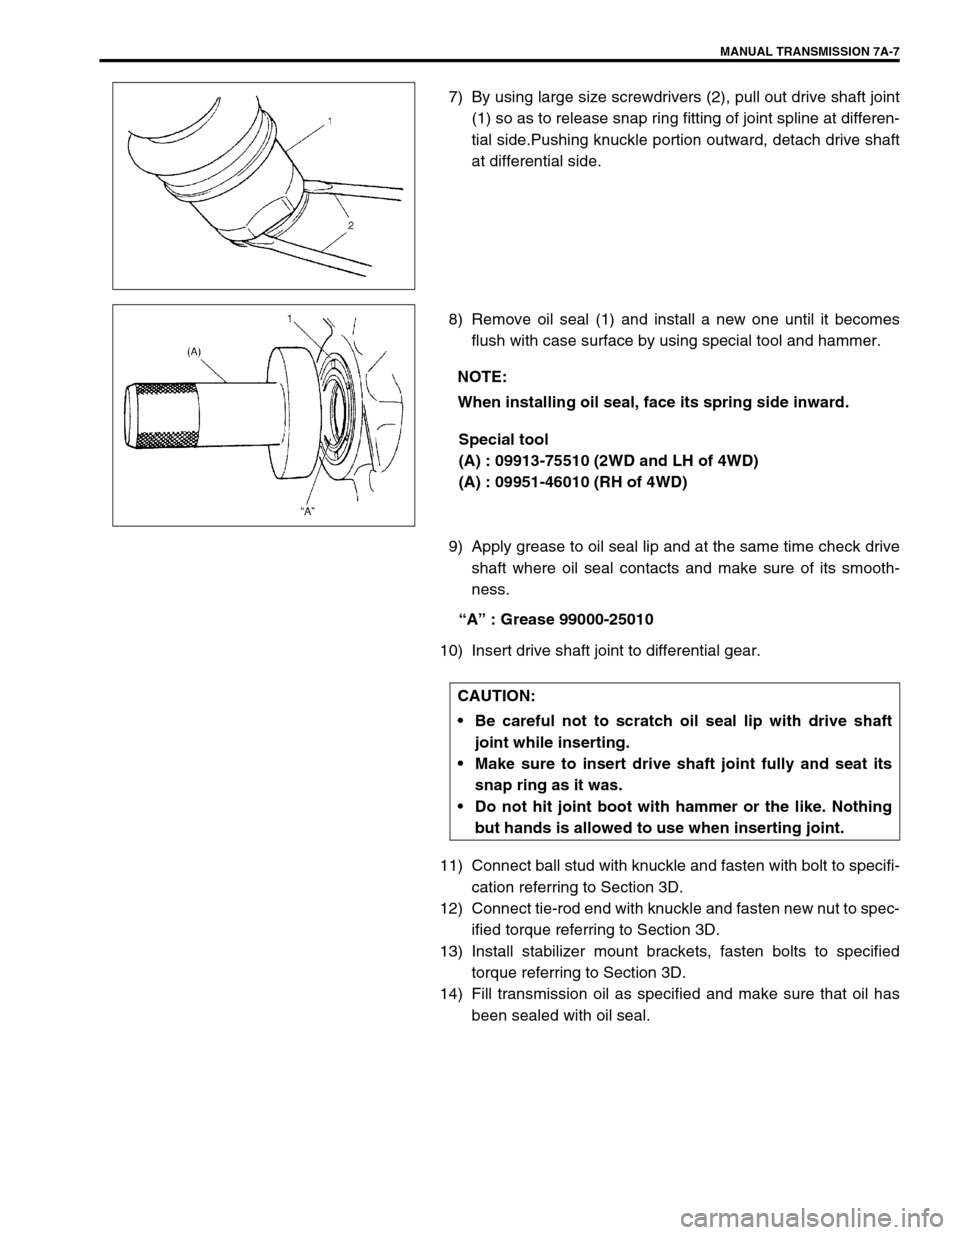 SUZUKI SWIFT 2000 1.G Transmission Service Workshop Manual MANUAL TRANSMISSION 7A-7
7) By using large size screwdrivers (2), pull out drive shaft joint
(1) so as to release snap ring fitting of joint spline at differen-
tial side.Pushing knuckle portion outwa